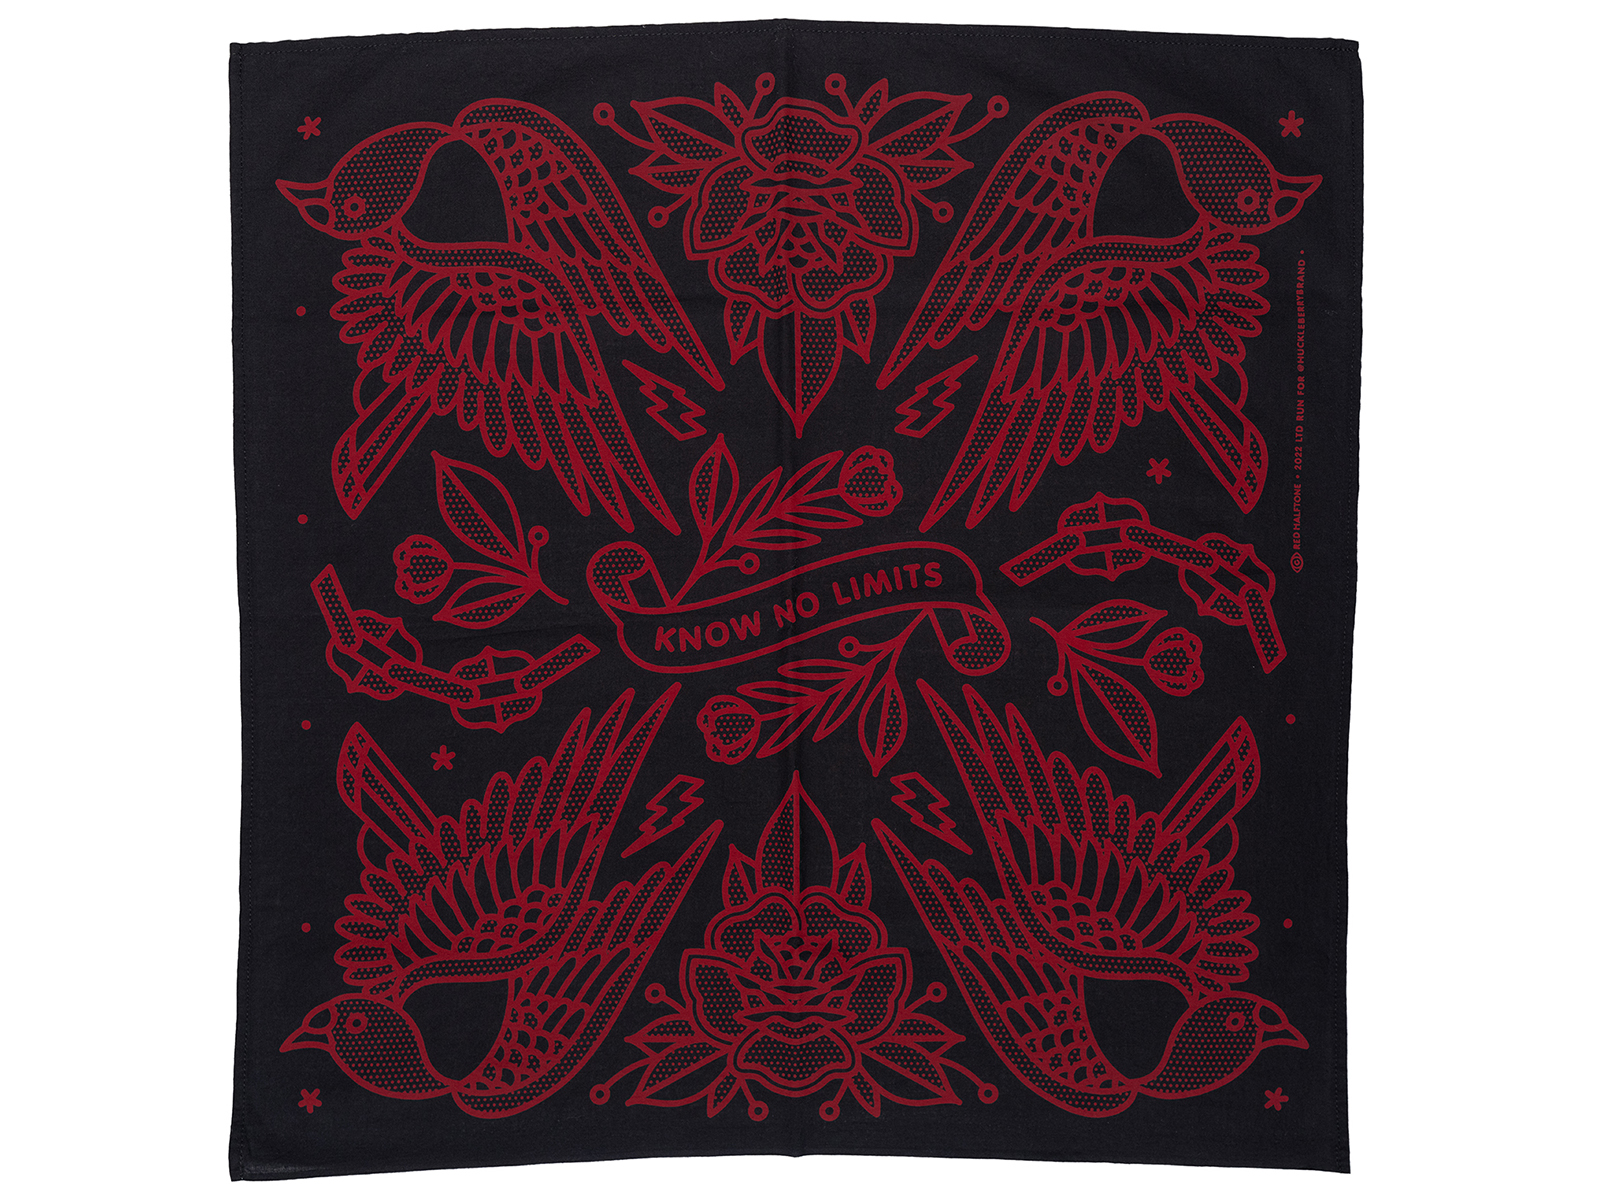 Flattened bandana showing the red on black colorway